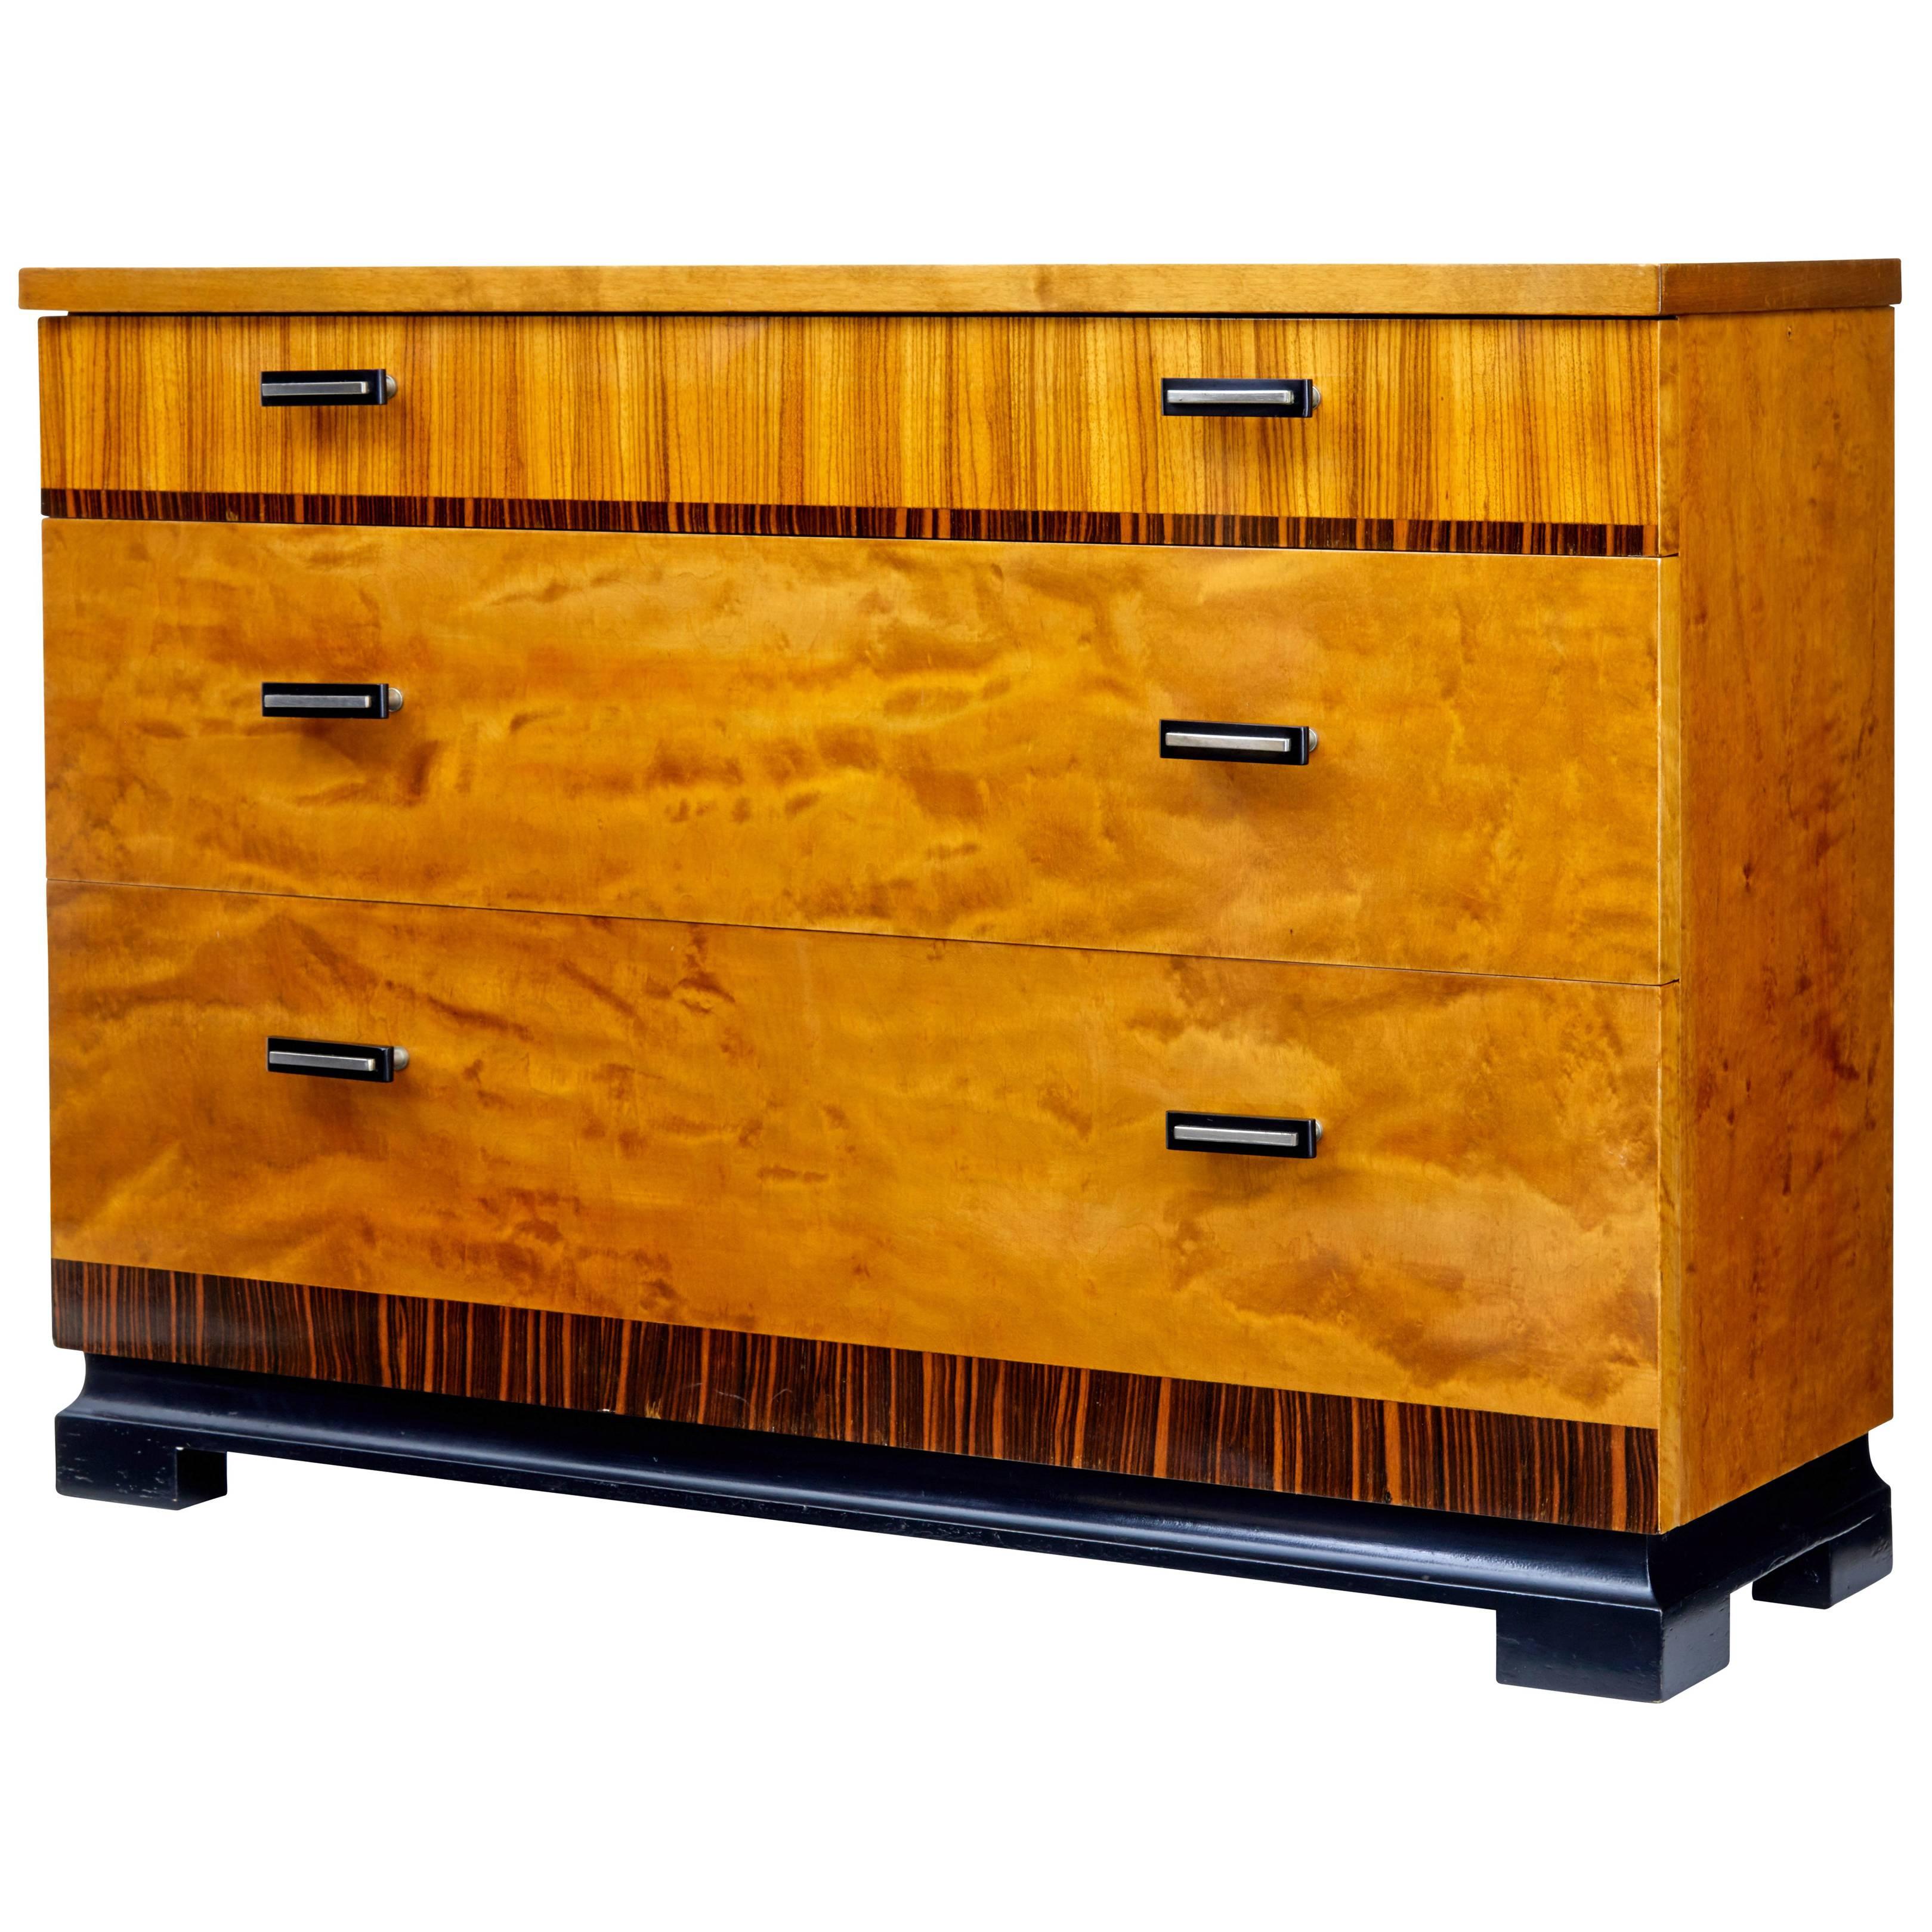 1950s Deco Inspired Small Chest of Drawers